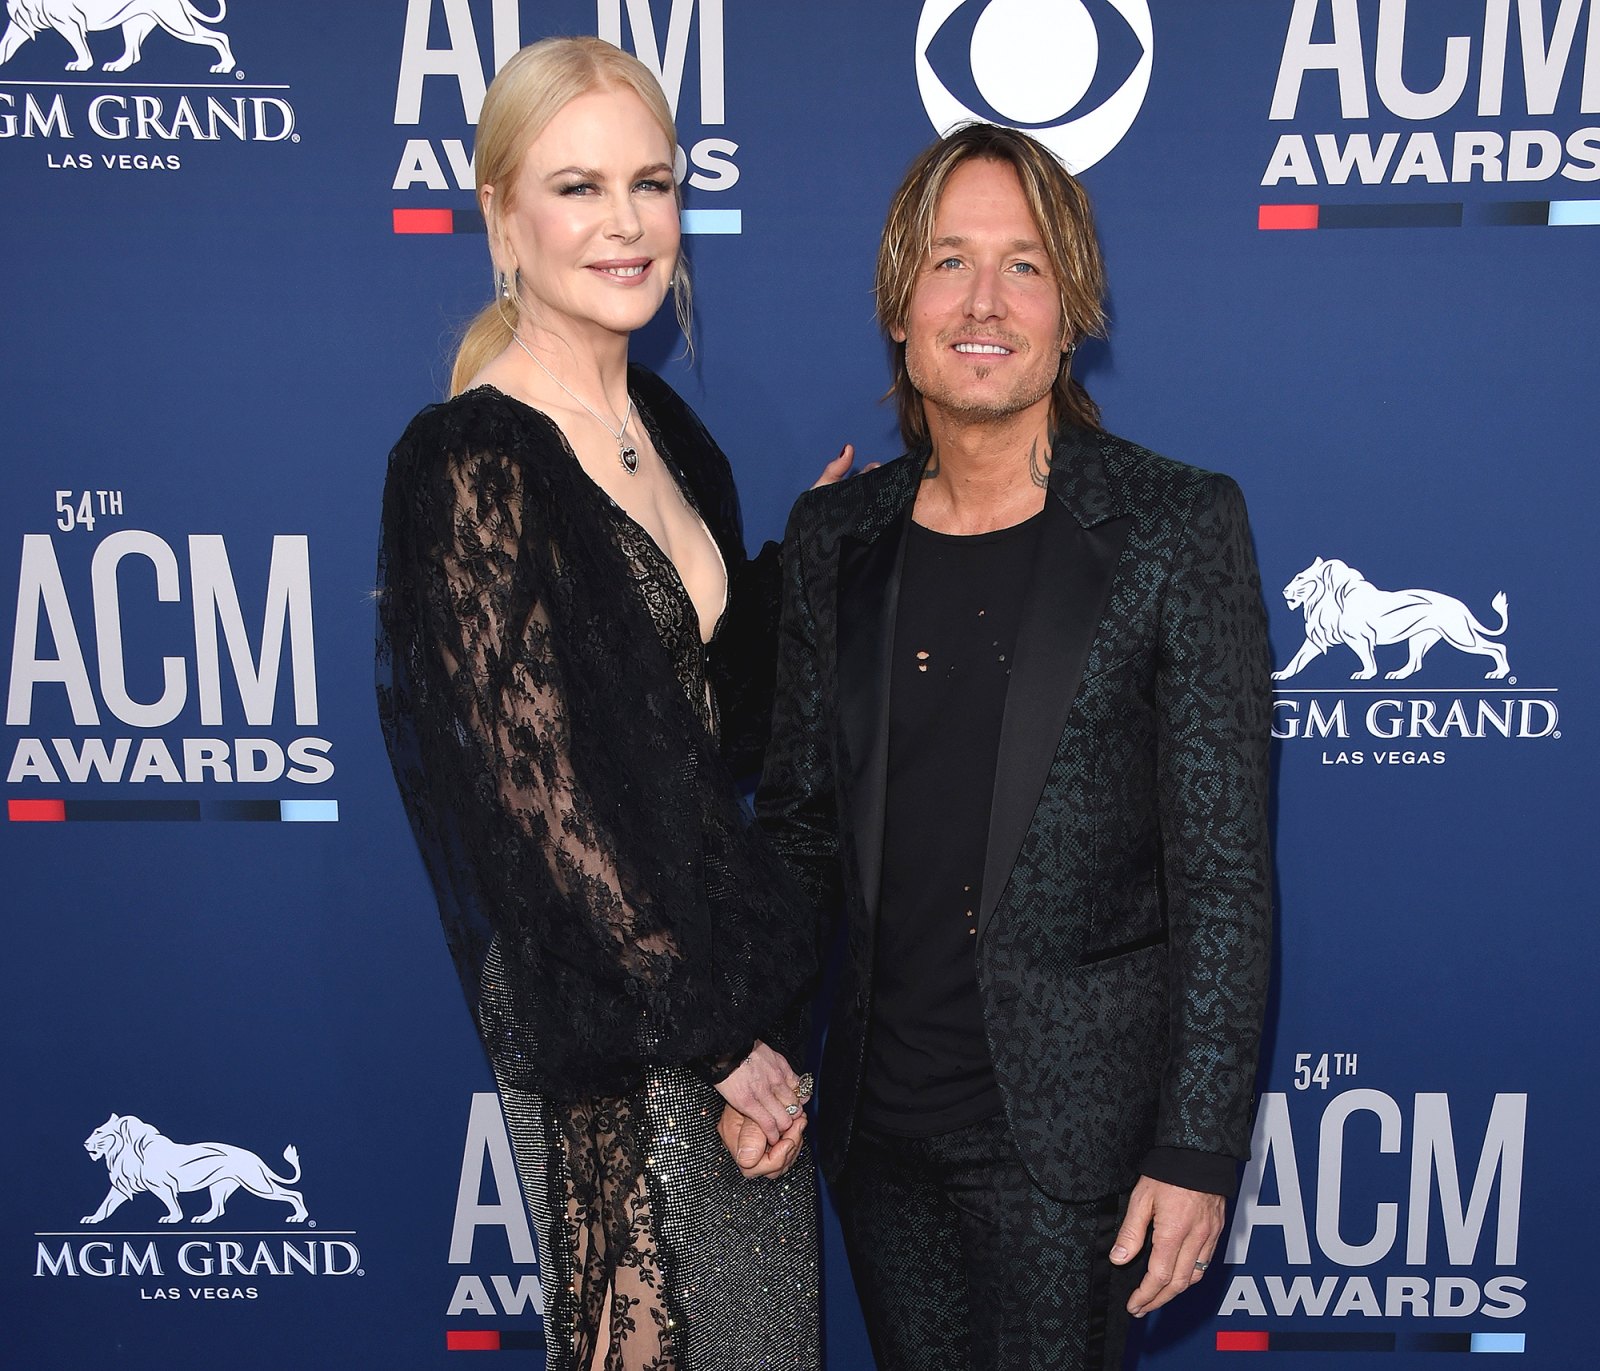 Keith Urban Most Candid Quotes About His Battle With Alcoholism Wife Nicole Kidman Support